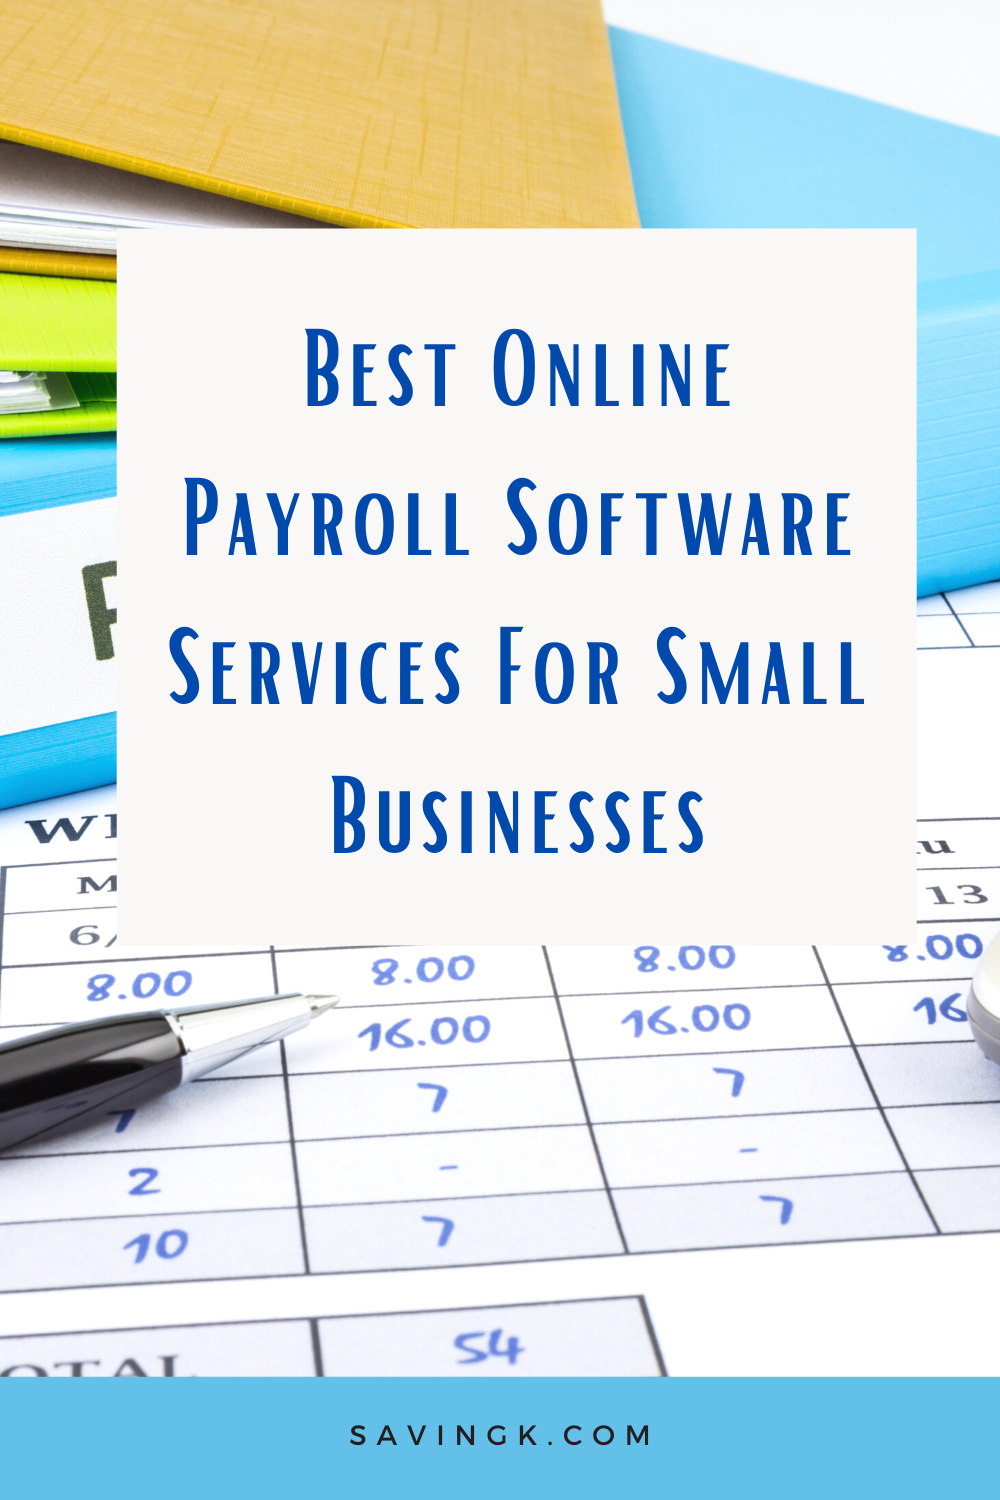 Best Online Payroll Software Services For Small Businesses